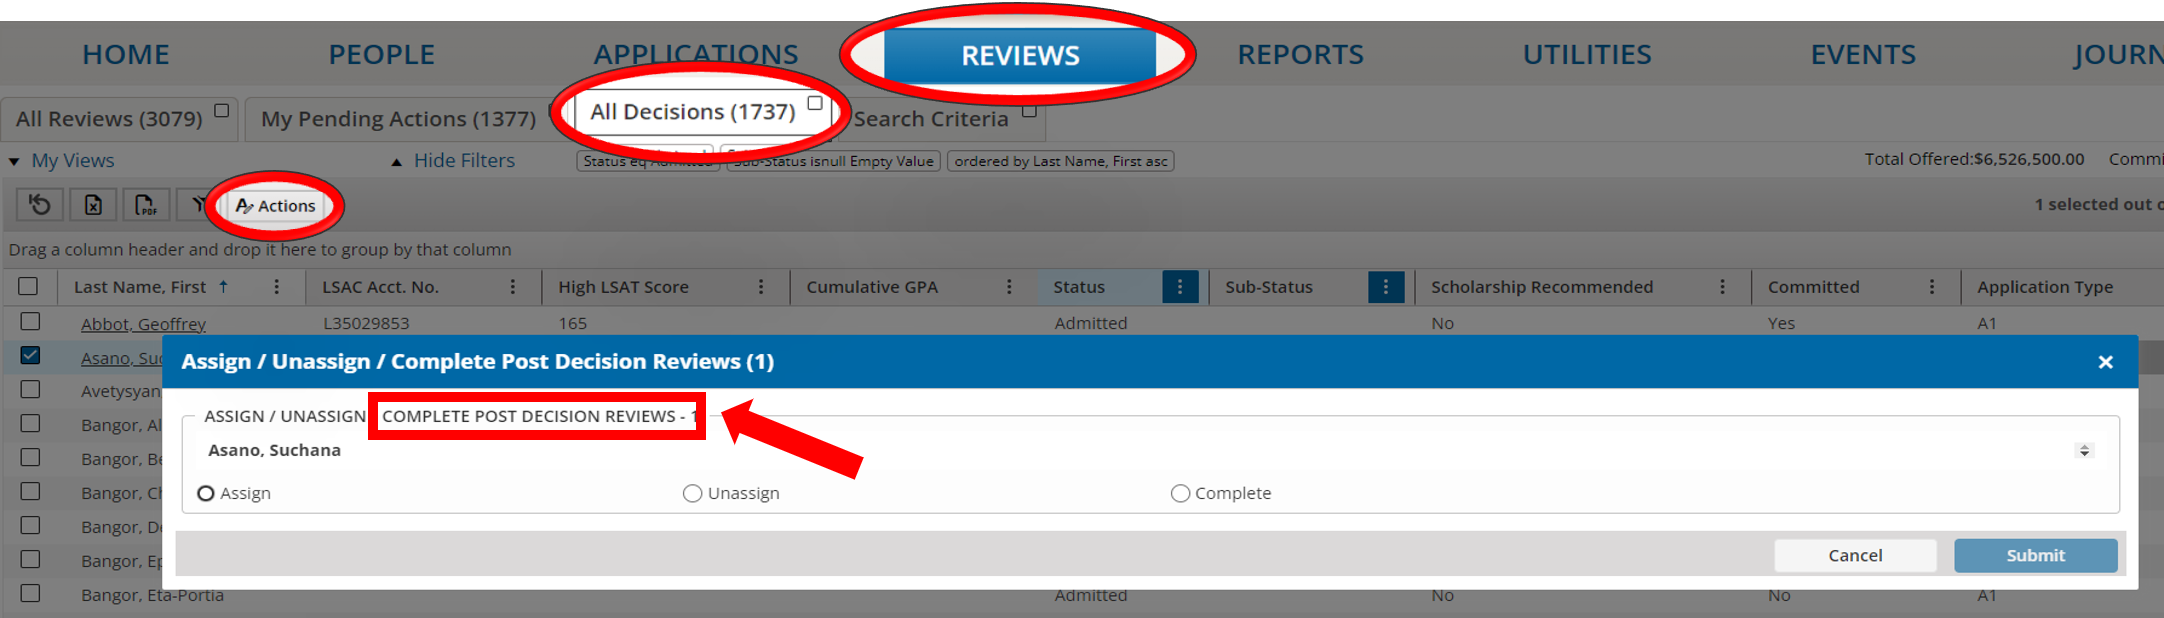 This image reflects the location needed to assign a post decision review, as detailed in the paragraph above. It is a screen shot of the Unite page with the title of the area circled, which is Reviews, and the title of the tab circled, which is All Decisions. It also circles the Action button and points out that the window shows that you can Assign or Unassign or Complete Post Decisions Reviews from this window.